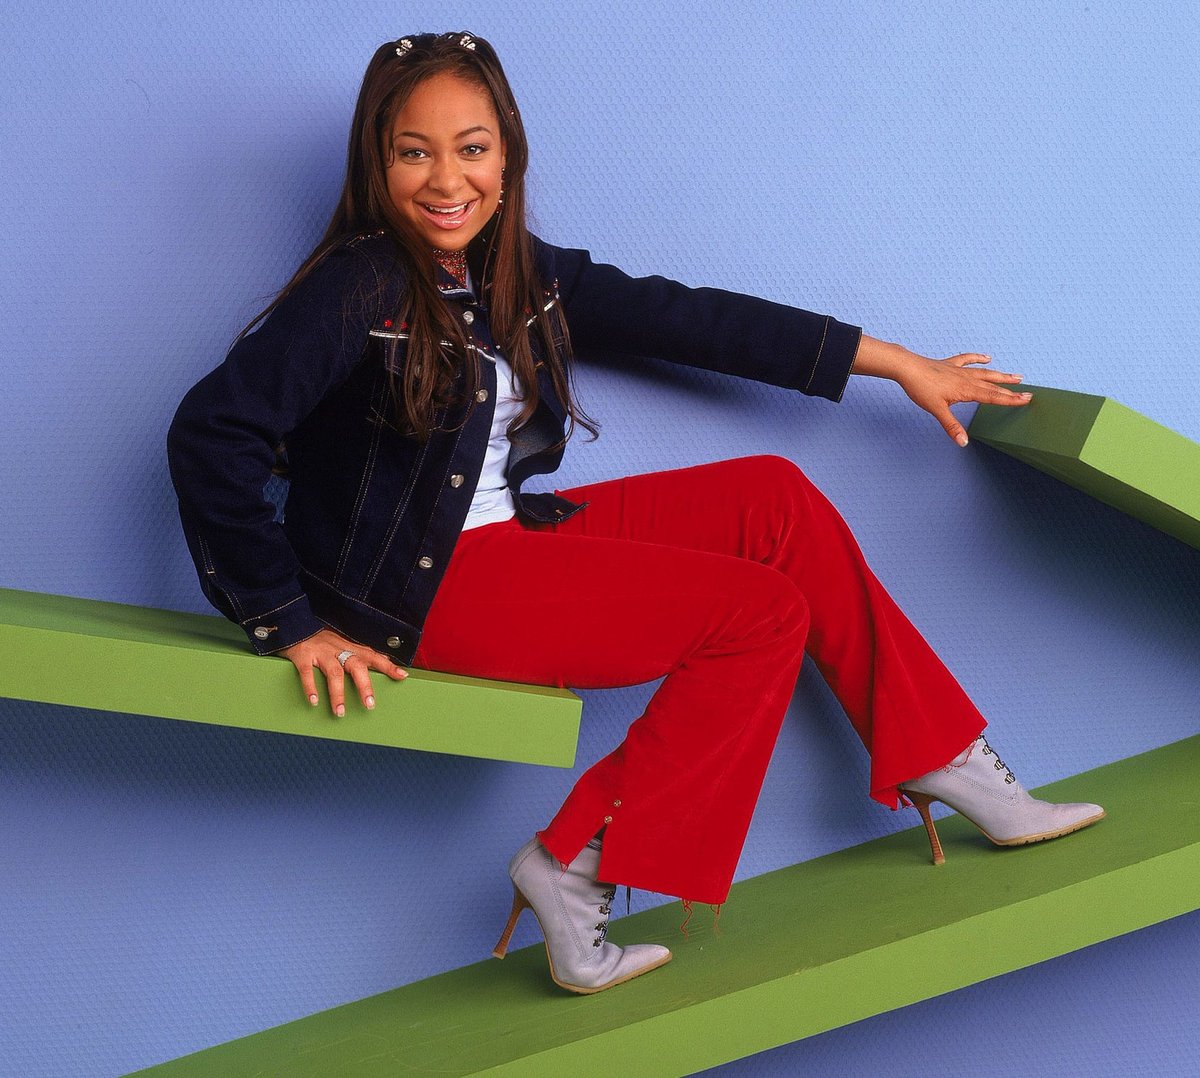 We don't talk about Raven Baxter's outfits enough (A THREAD)